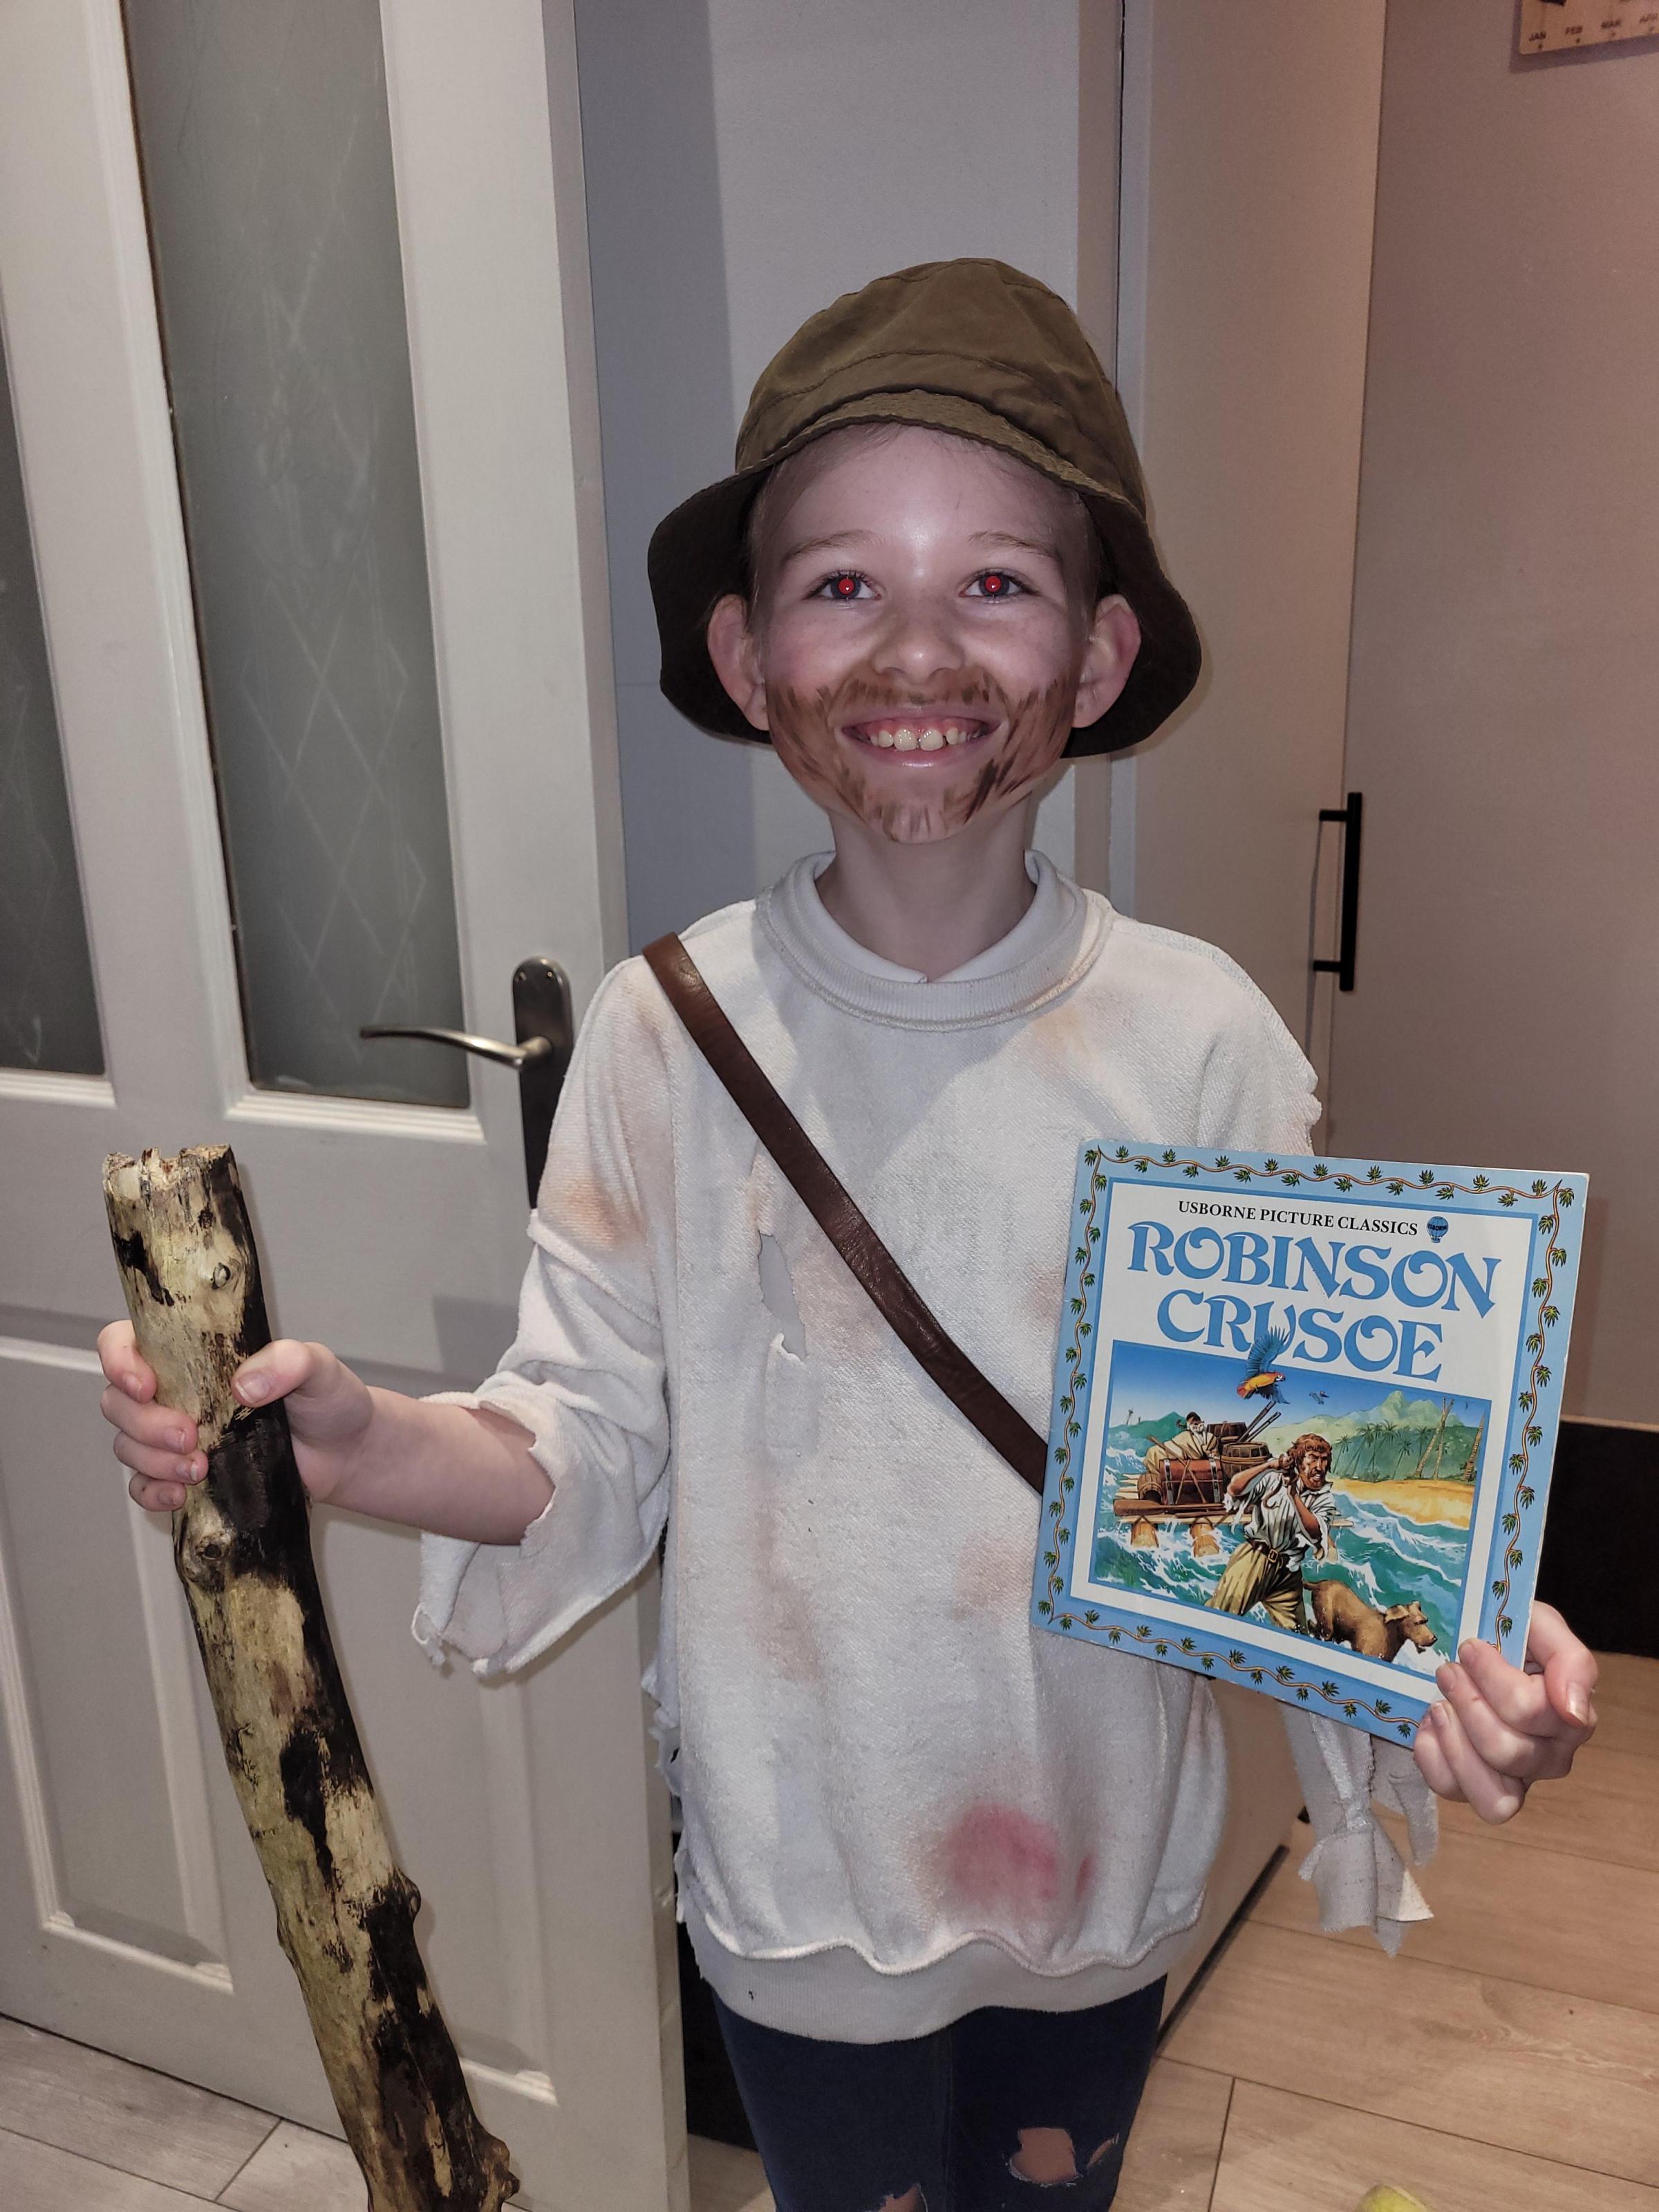 Nine-year-old Milly Shallcross from Leftwich as Robinson Crusoe